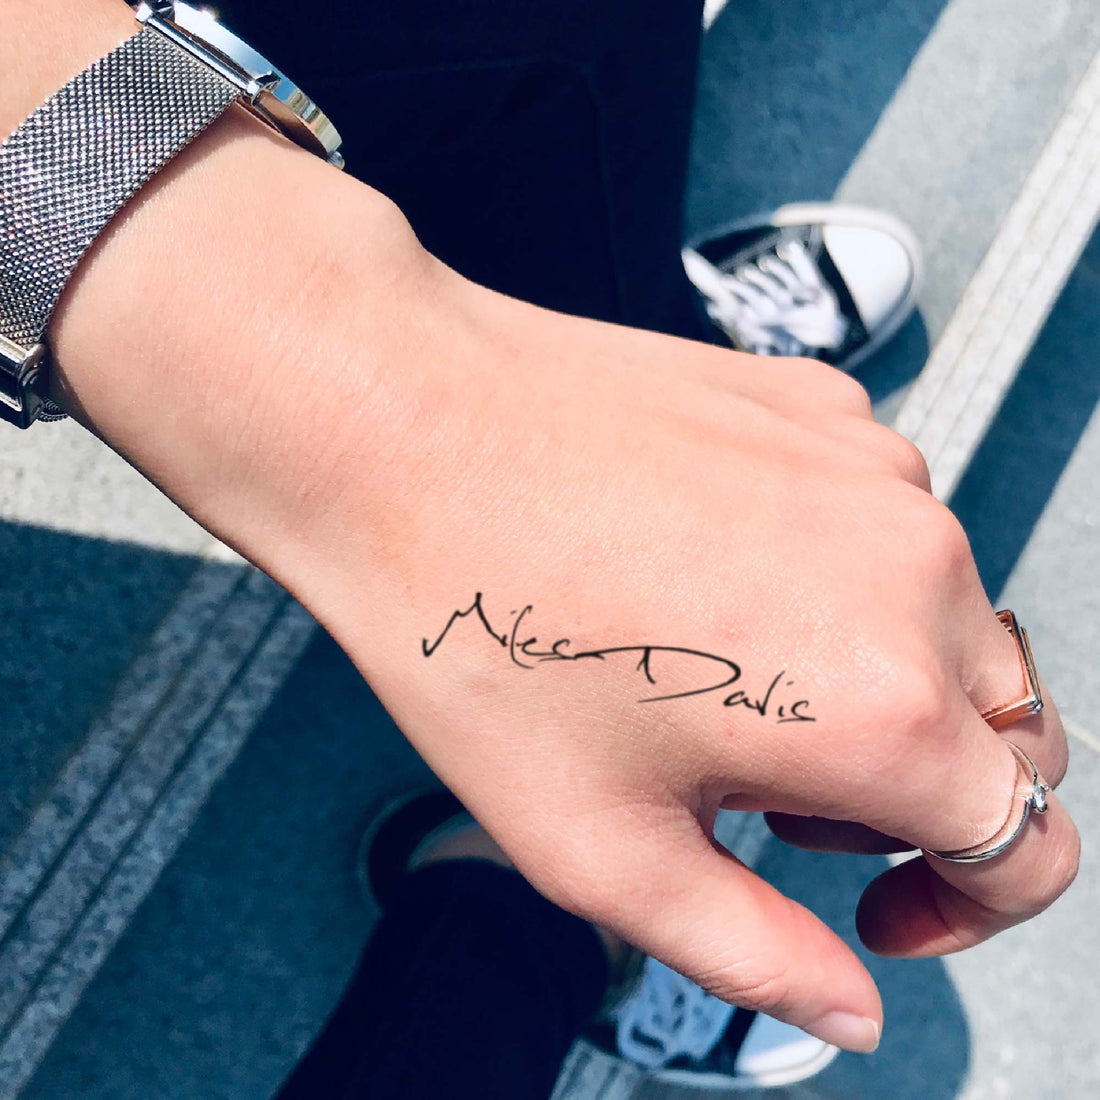 Miles Davis custom temporary tattoo sticker design idea inspiration meanings removal arm wrist hand words font name signature calligraphy lyrics tour concert outfits merch accessory gift souvenir costumes wear dress up code